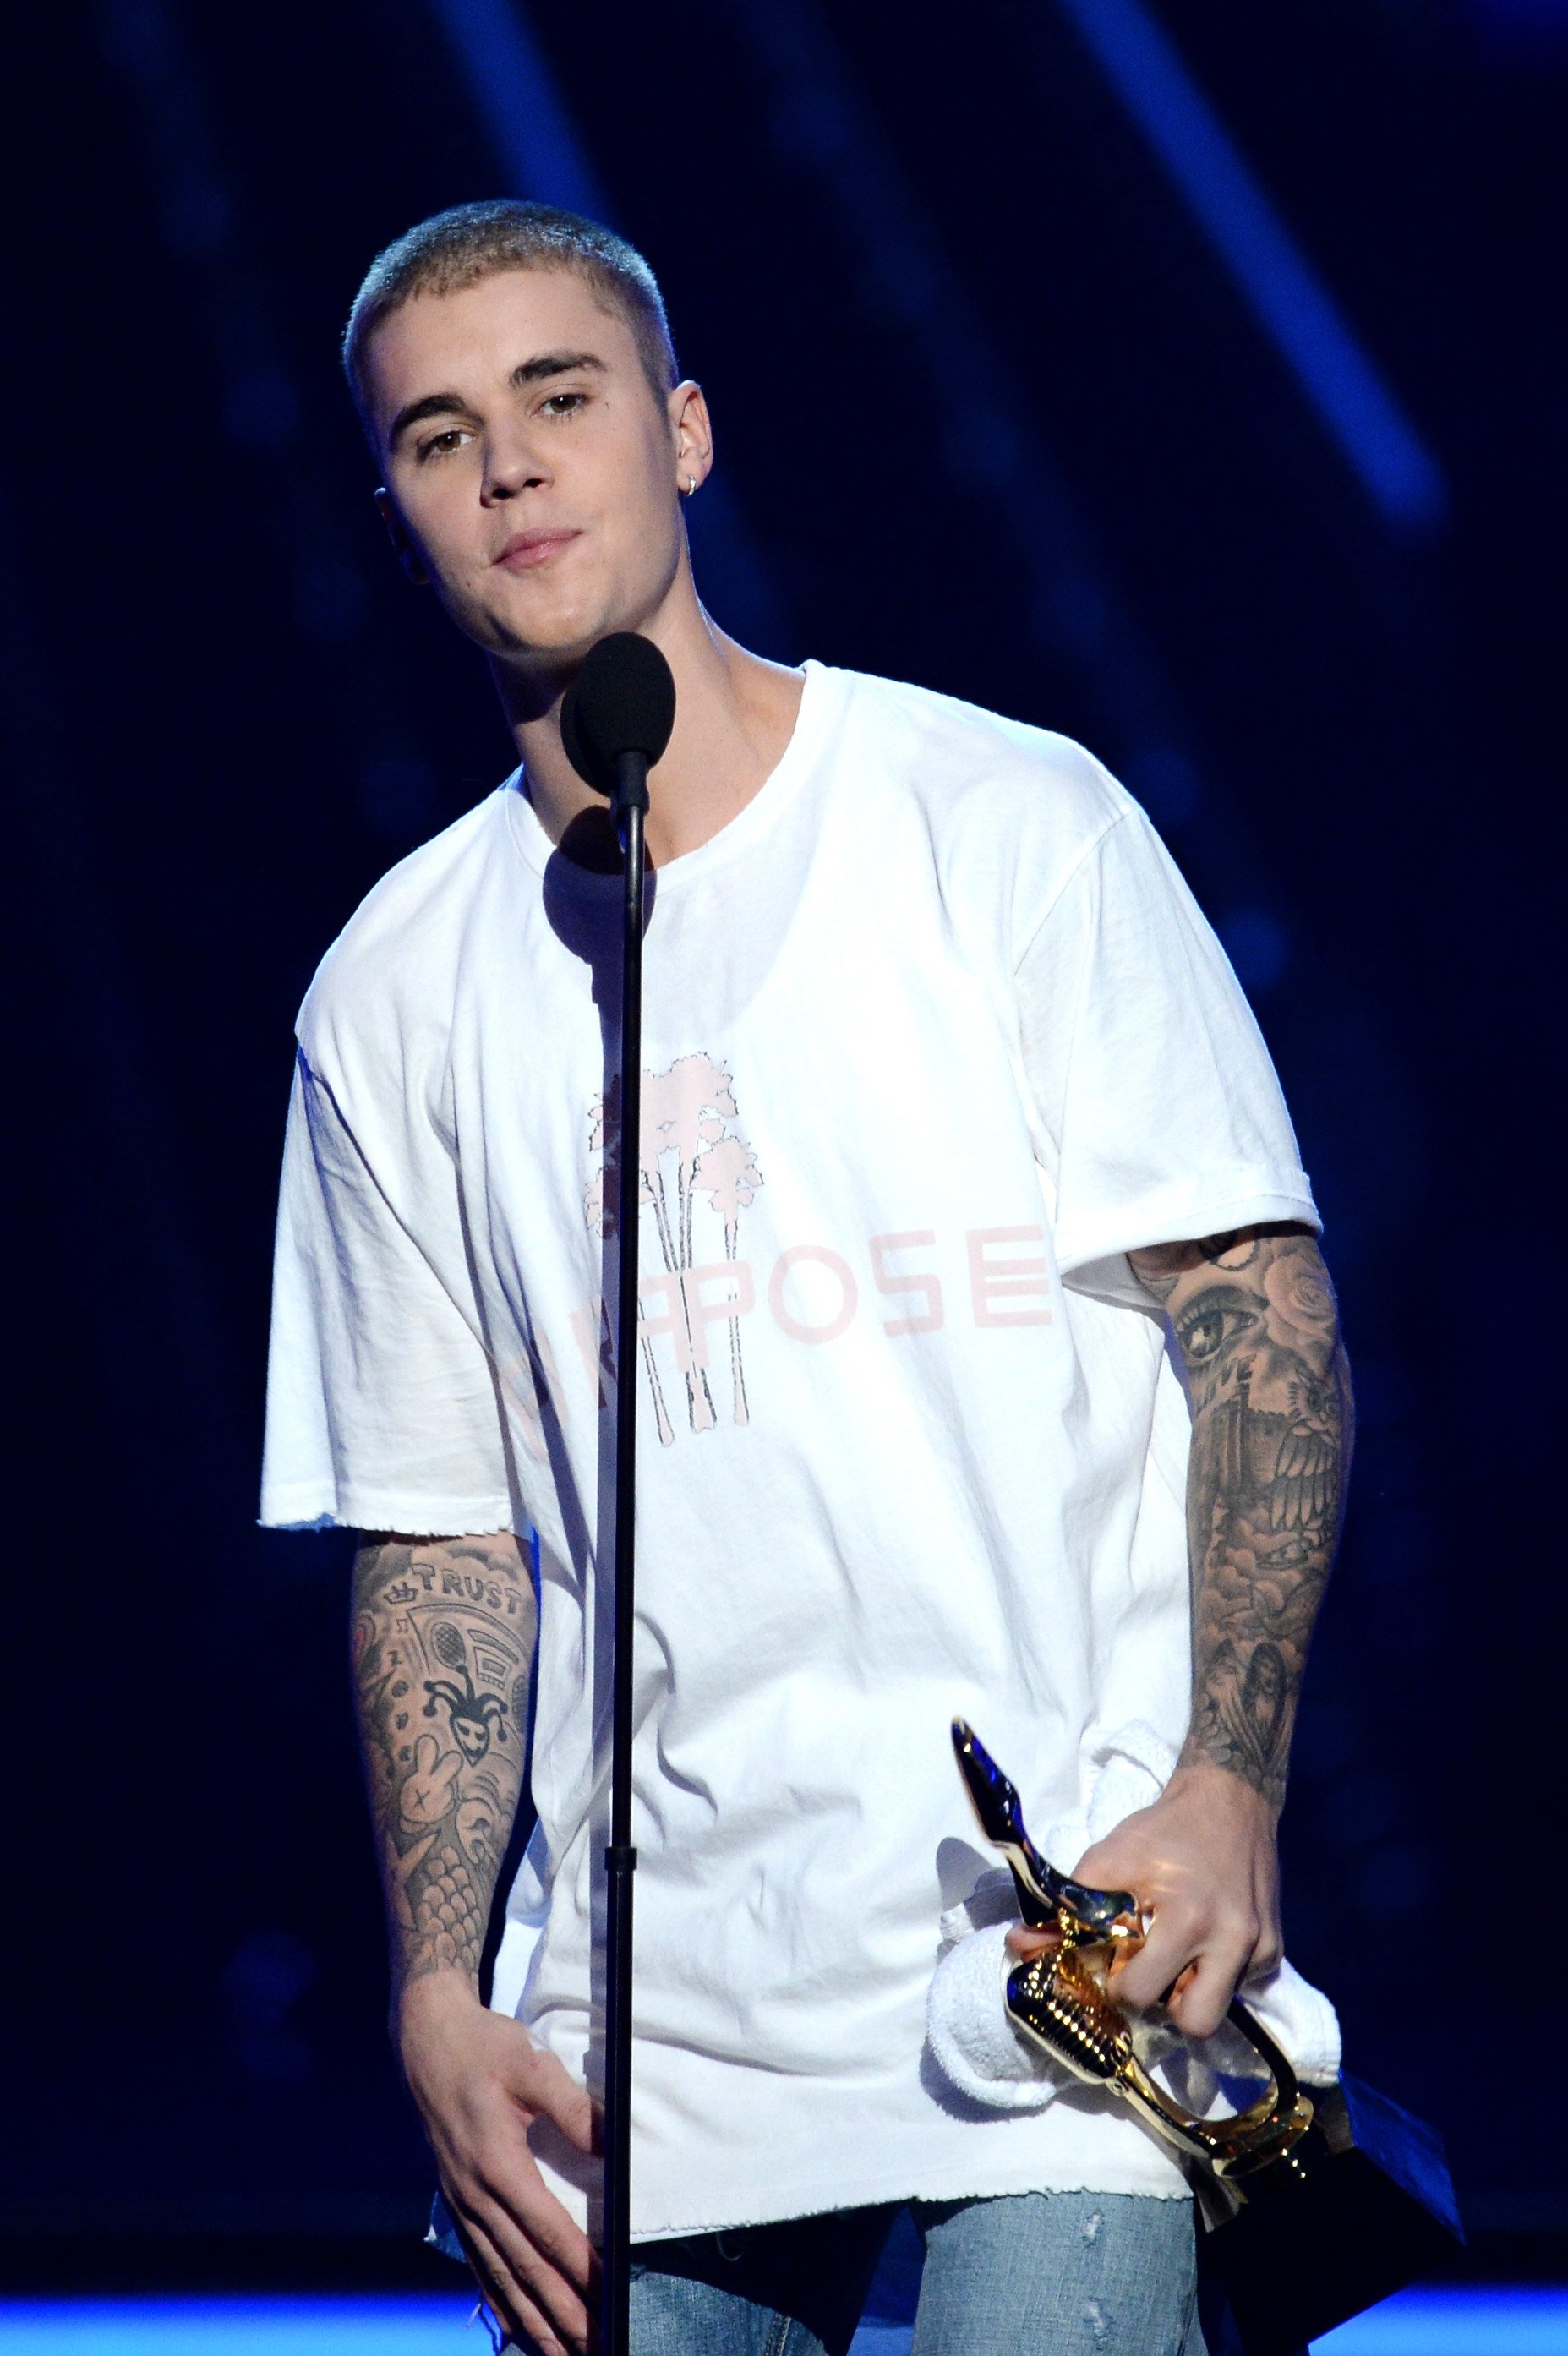 Justin Bieber accepts the Top Male Artist award onstage during the 2016 Billboard Music Awards at T-Mobile Arena on May 22, 2016 in Las Vegas